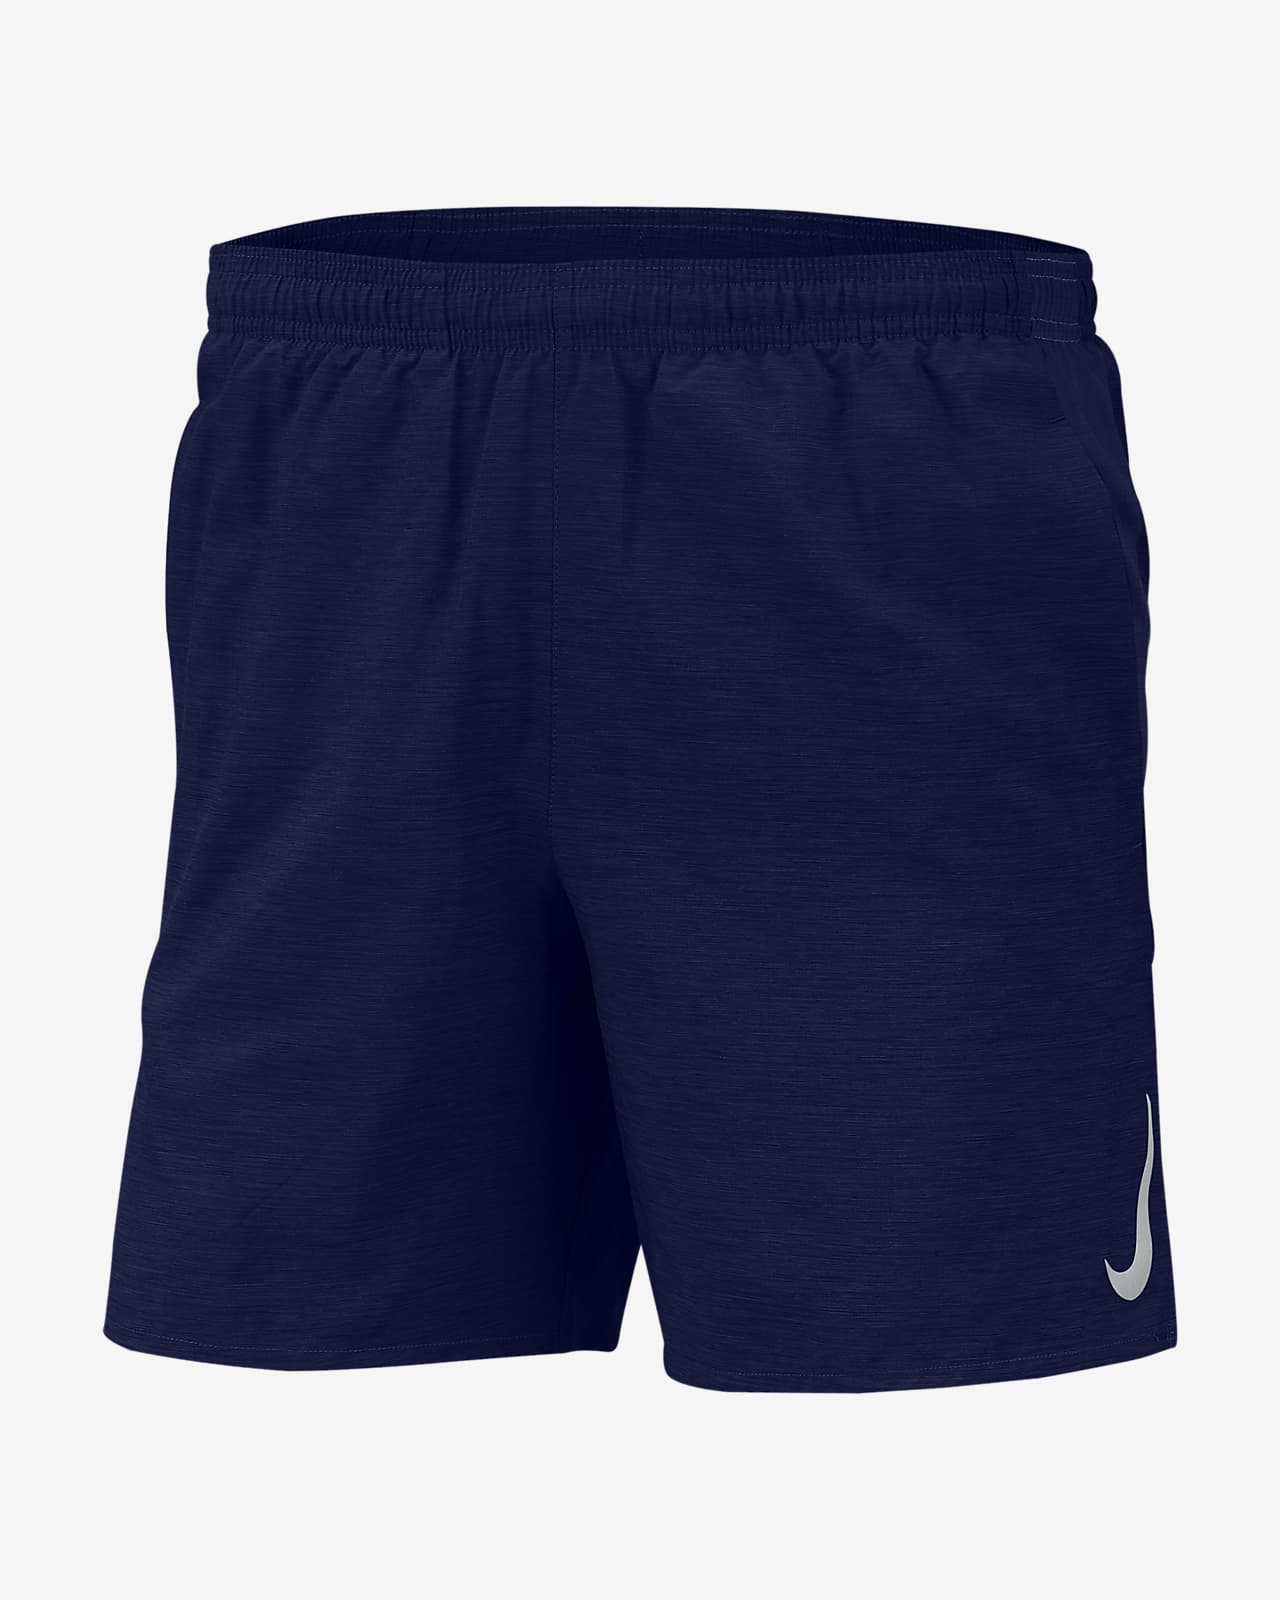 Nike Challenger Men's 18cm (approx.) Lined Running Shorts